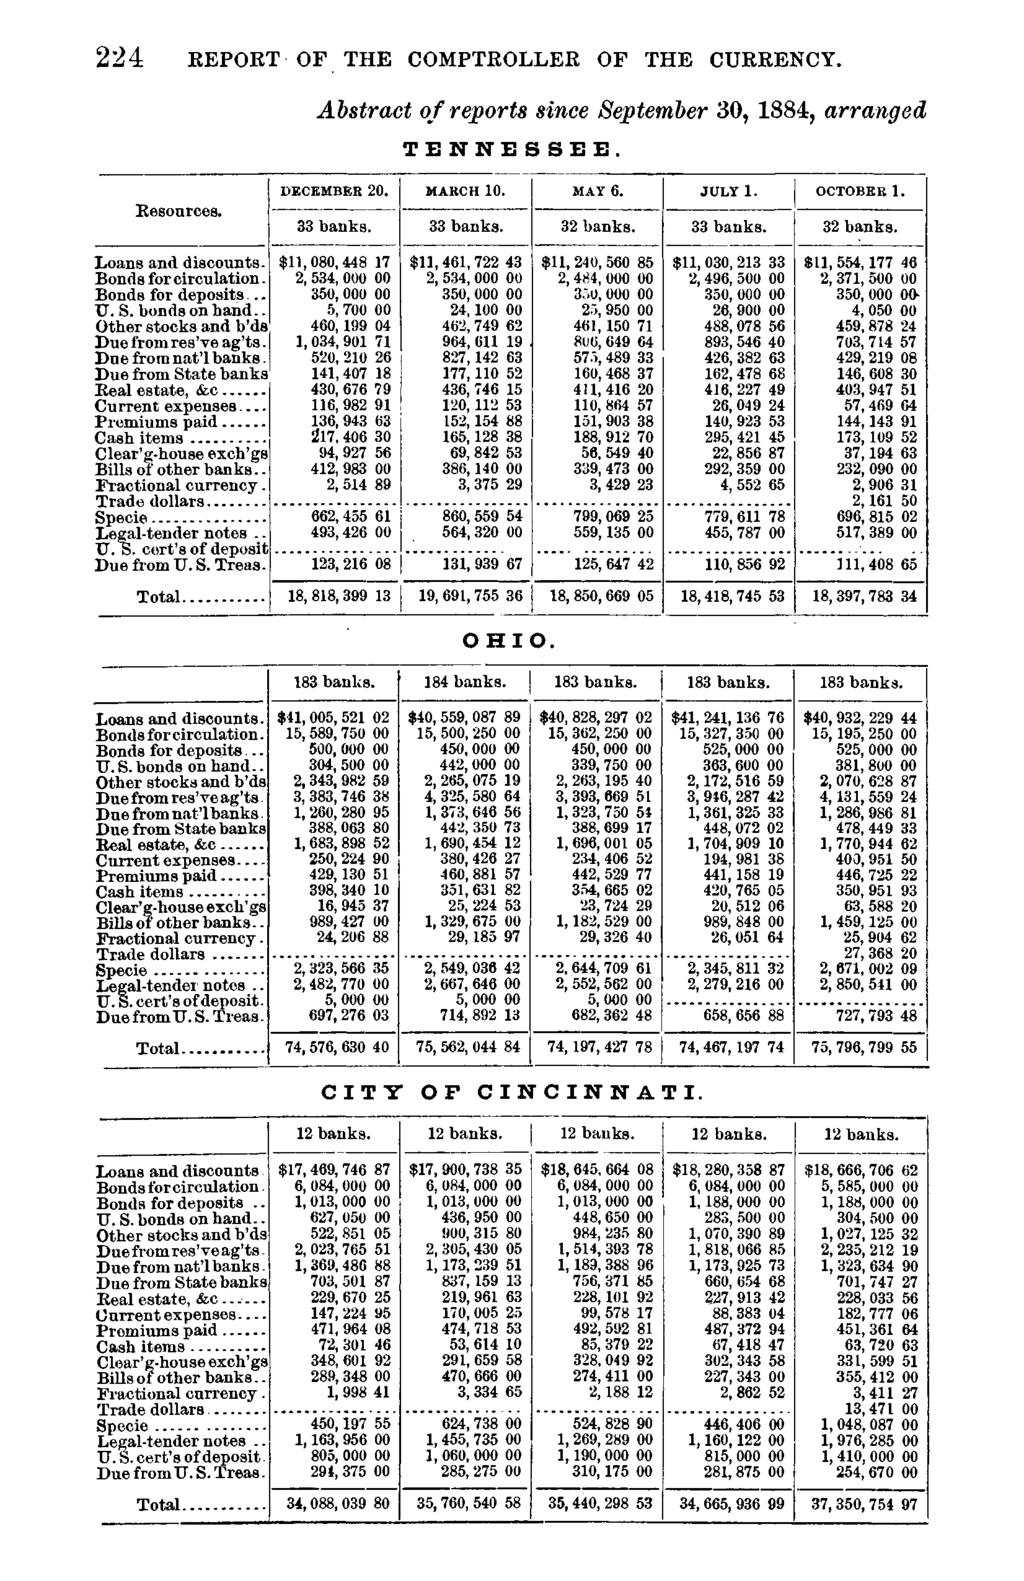 224 REPORT OF THE COMPTROLLER OF THE CURRENCY. Abstract of reports since September 30, 1884, arranged TENNESSEE. Resources. Loans and discounts. Bonds for circulation. Bonds for deposits.. U. S. bonds on hand.